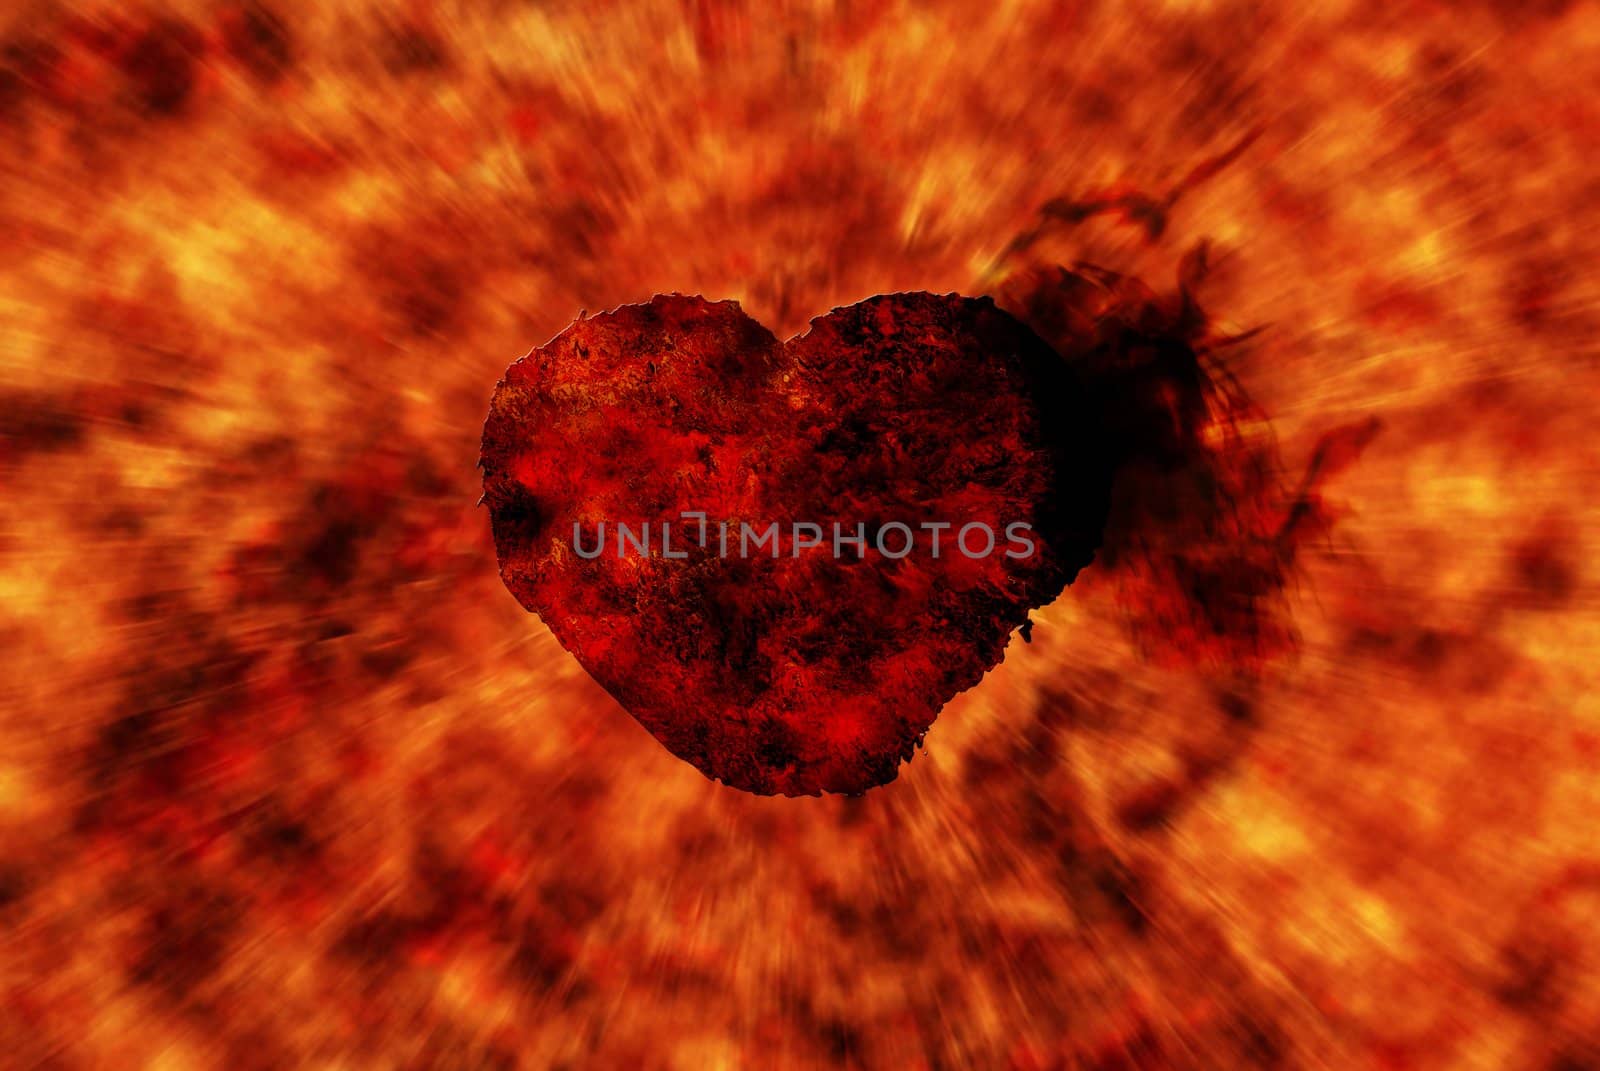 Burning heart with flame effect and zoom in flame background, can be use for various love related concepts, design and print out.